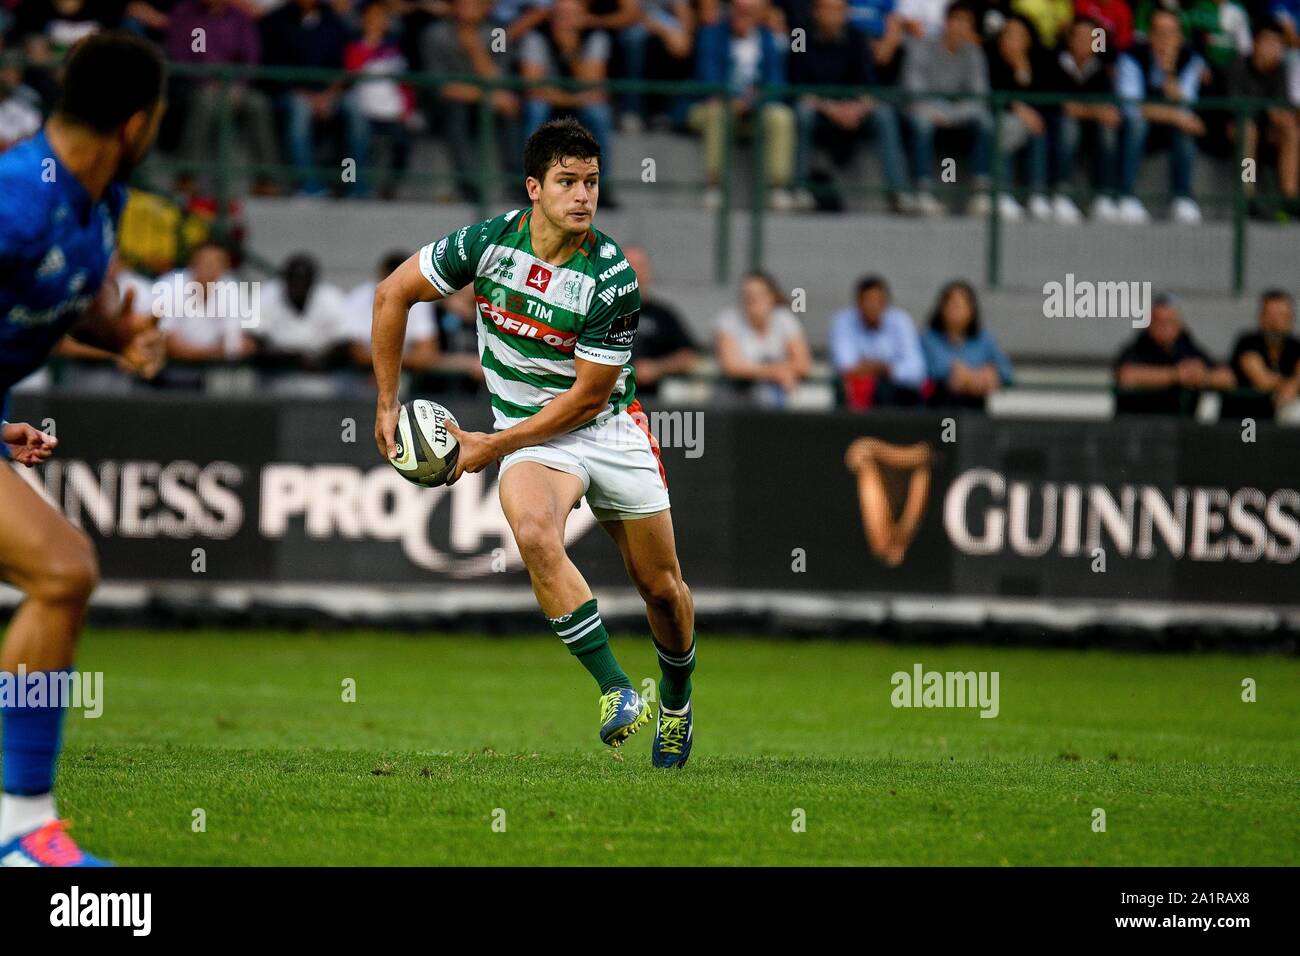 Treviso, Italy. 28th Sep, 2019. JOAQUIN RIERA OF BENETTON TREVISO during Benetton Treviso Vs Leinster Rugby - Rugby Guinness Pro 14 - Credit: LPS/Ettore Griffoni/Alamy Live News Stock Photo